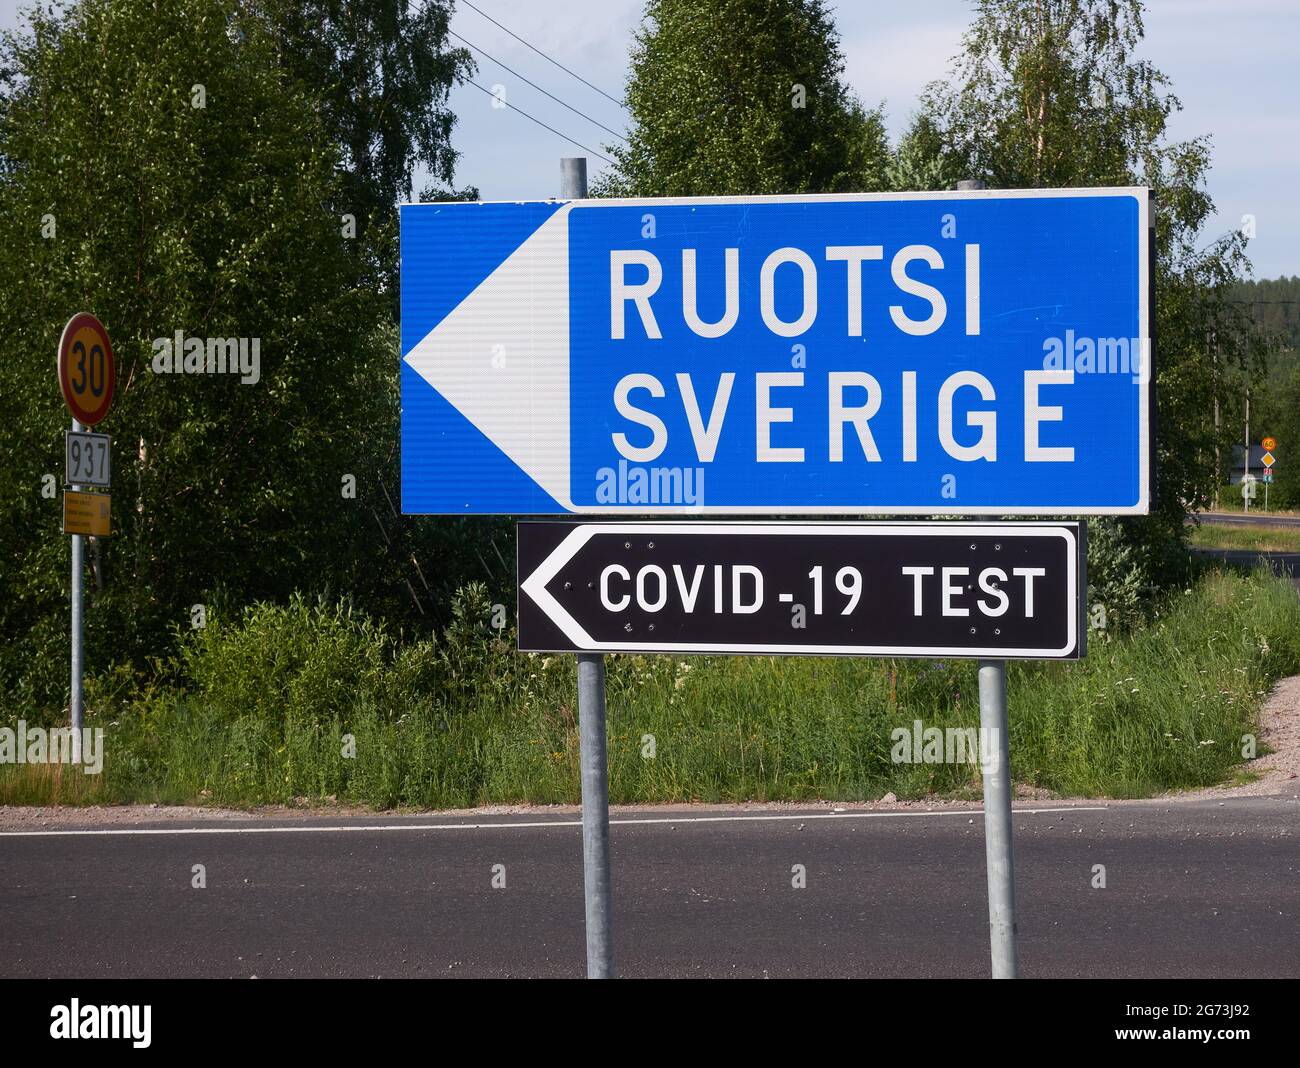 Pello, Finland - July 7, 2021: Traffic sign indicating border crossing from Finland to Sweden and covid-19 test at Pello, Finland in the Finnish Weste Stock Photo